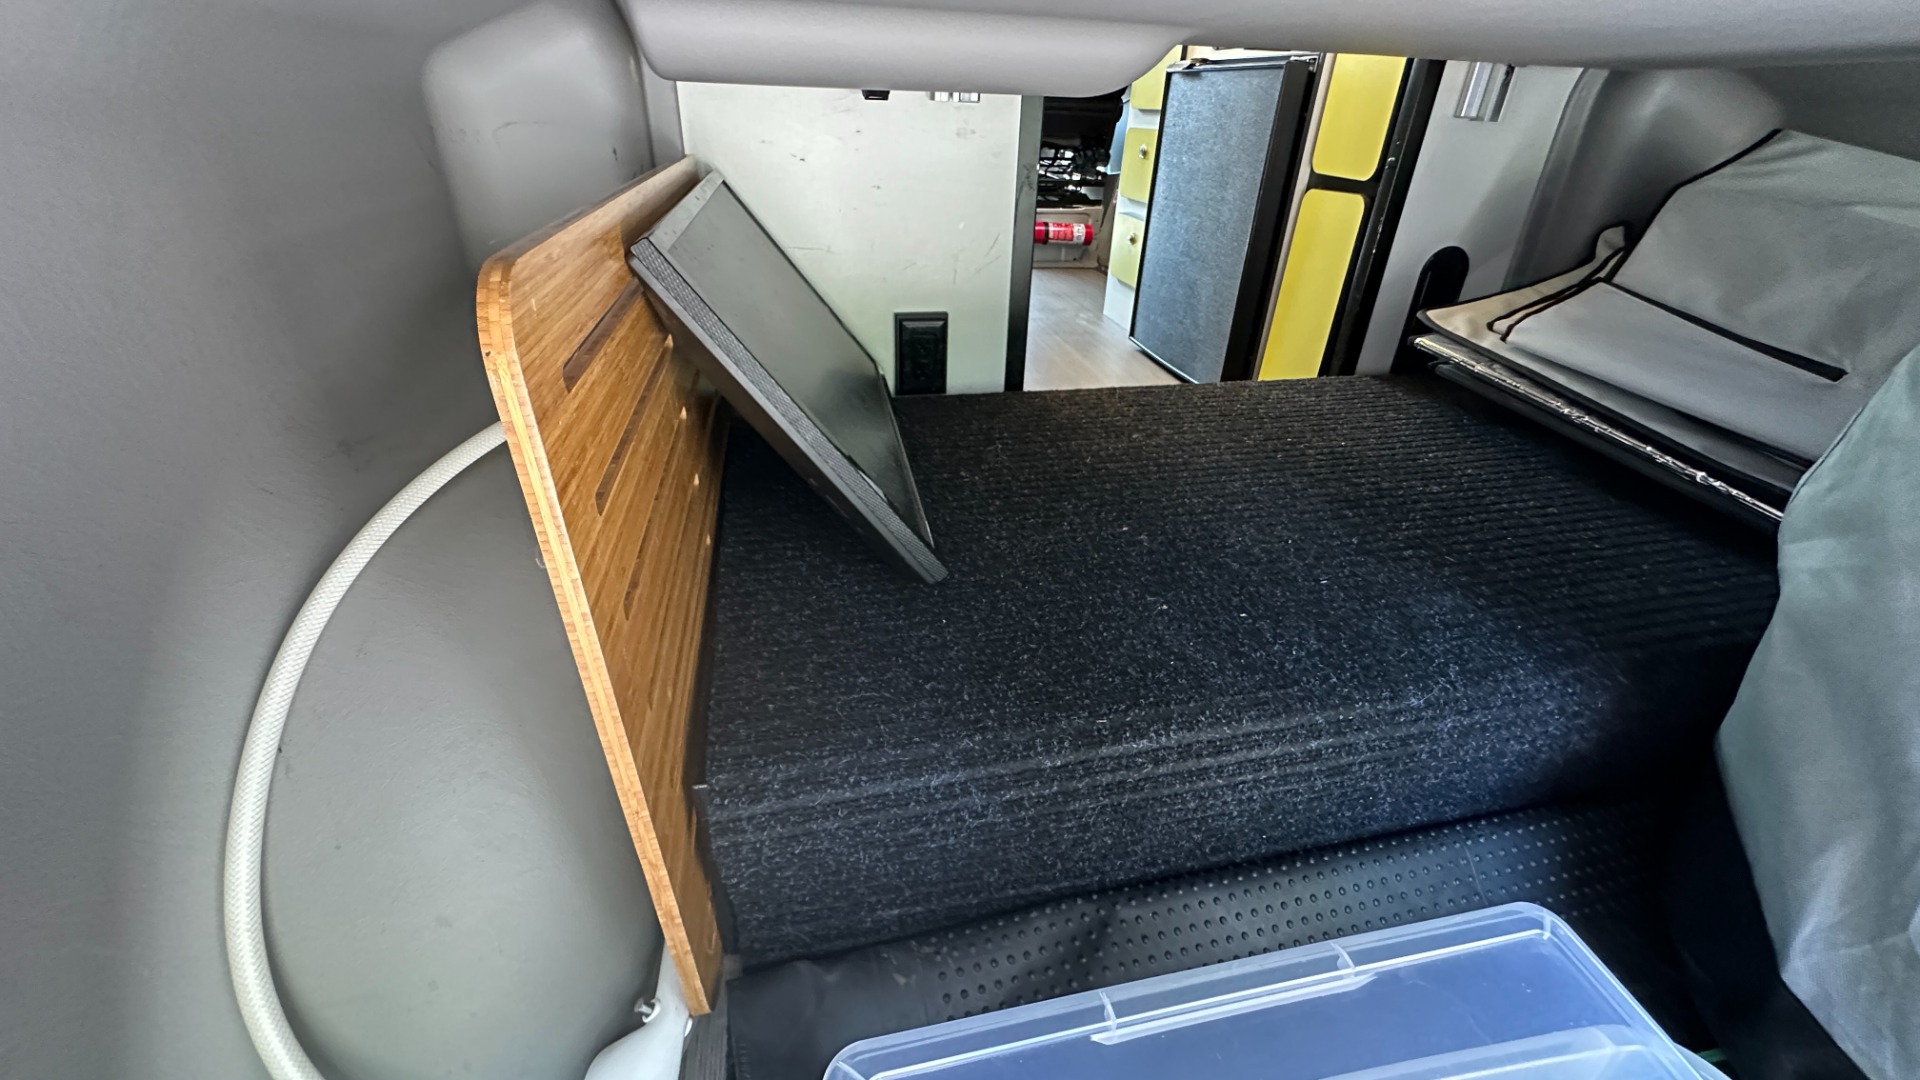 Used 2018 Mercedes-Benz Sprinter Winnebego OVERLANDER / CONVERSION SPRINTER / 4X4 / KITCHEN / BATHROOM / AIR / AWNING for sale $129,000 at Formula Imports in Charlotte NC 28227 96